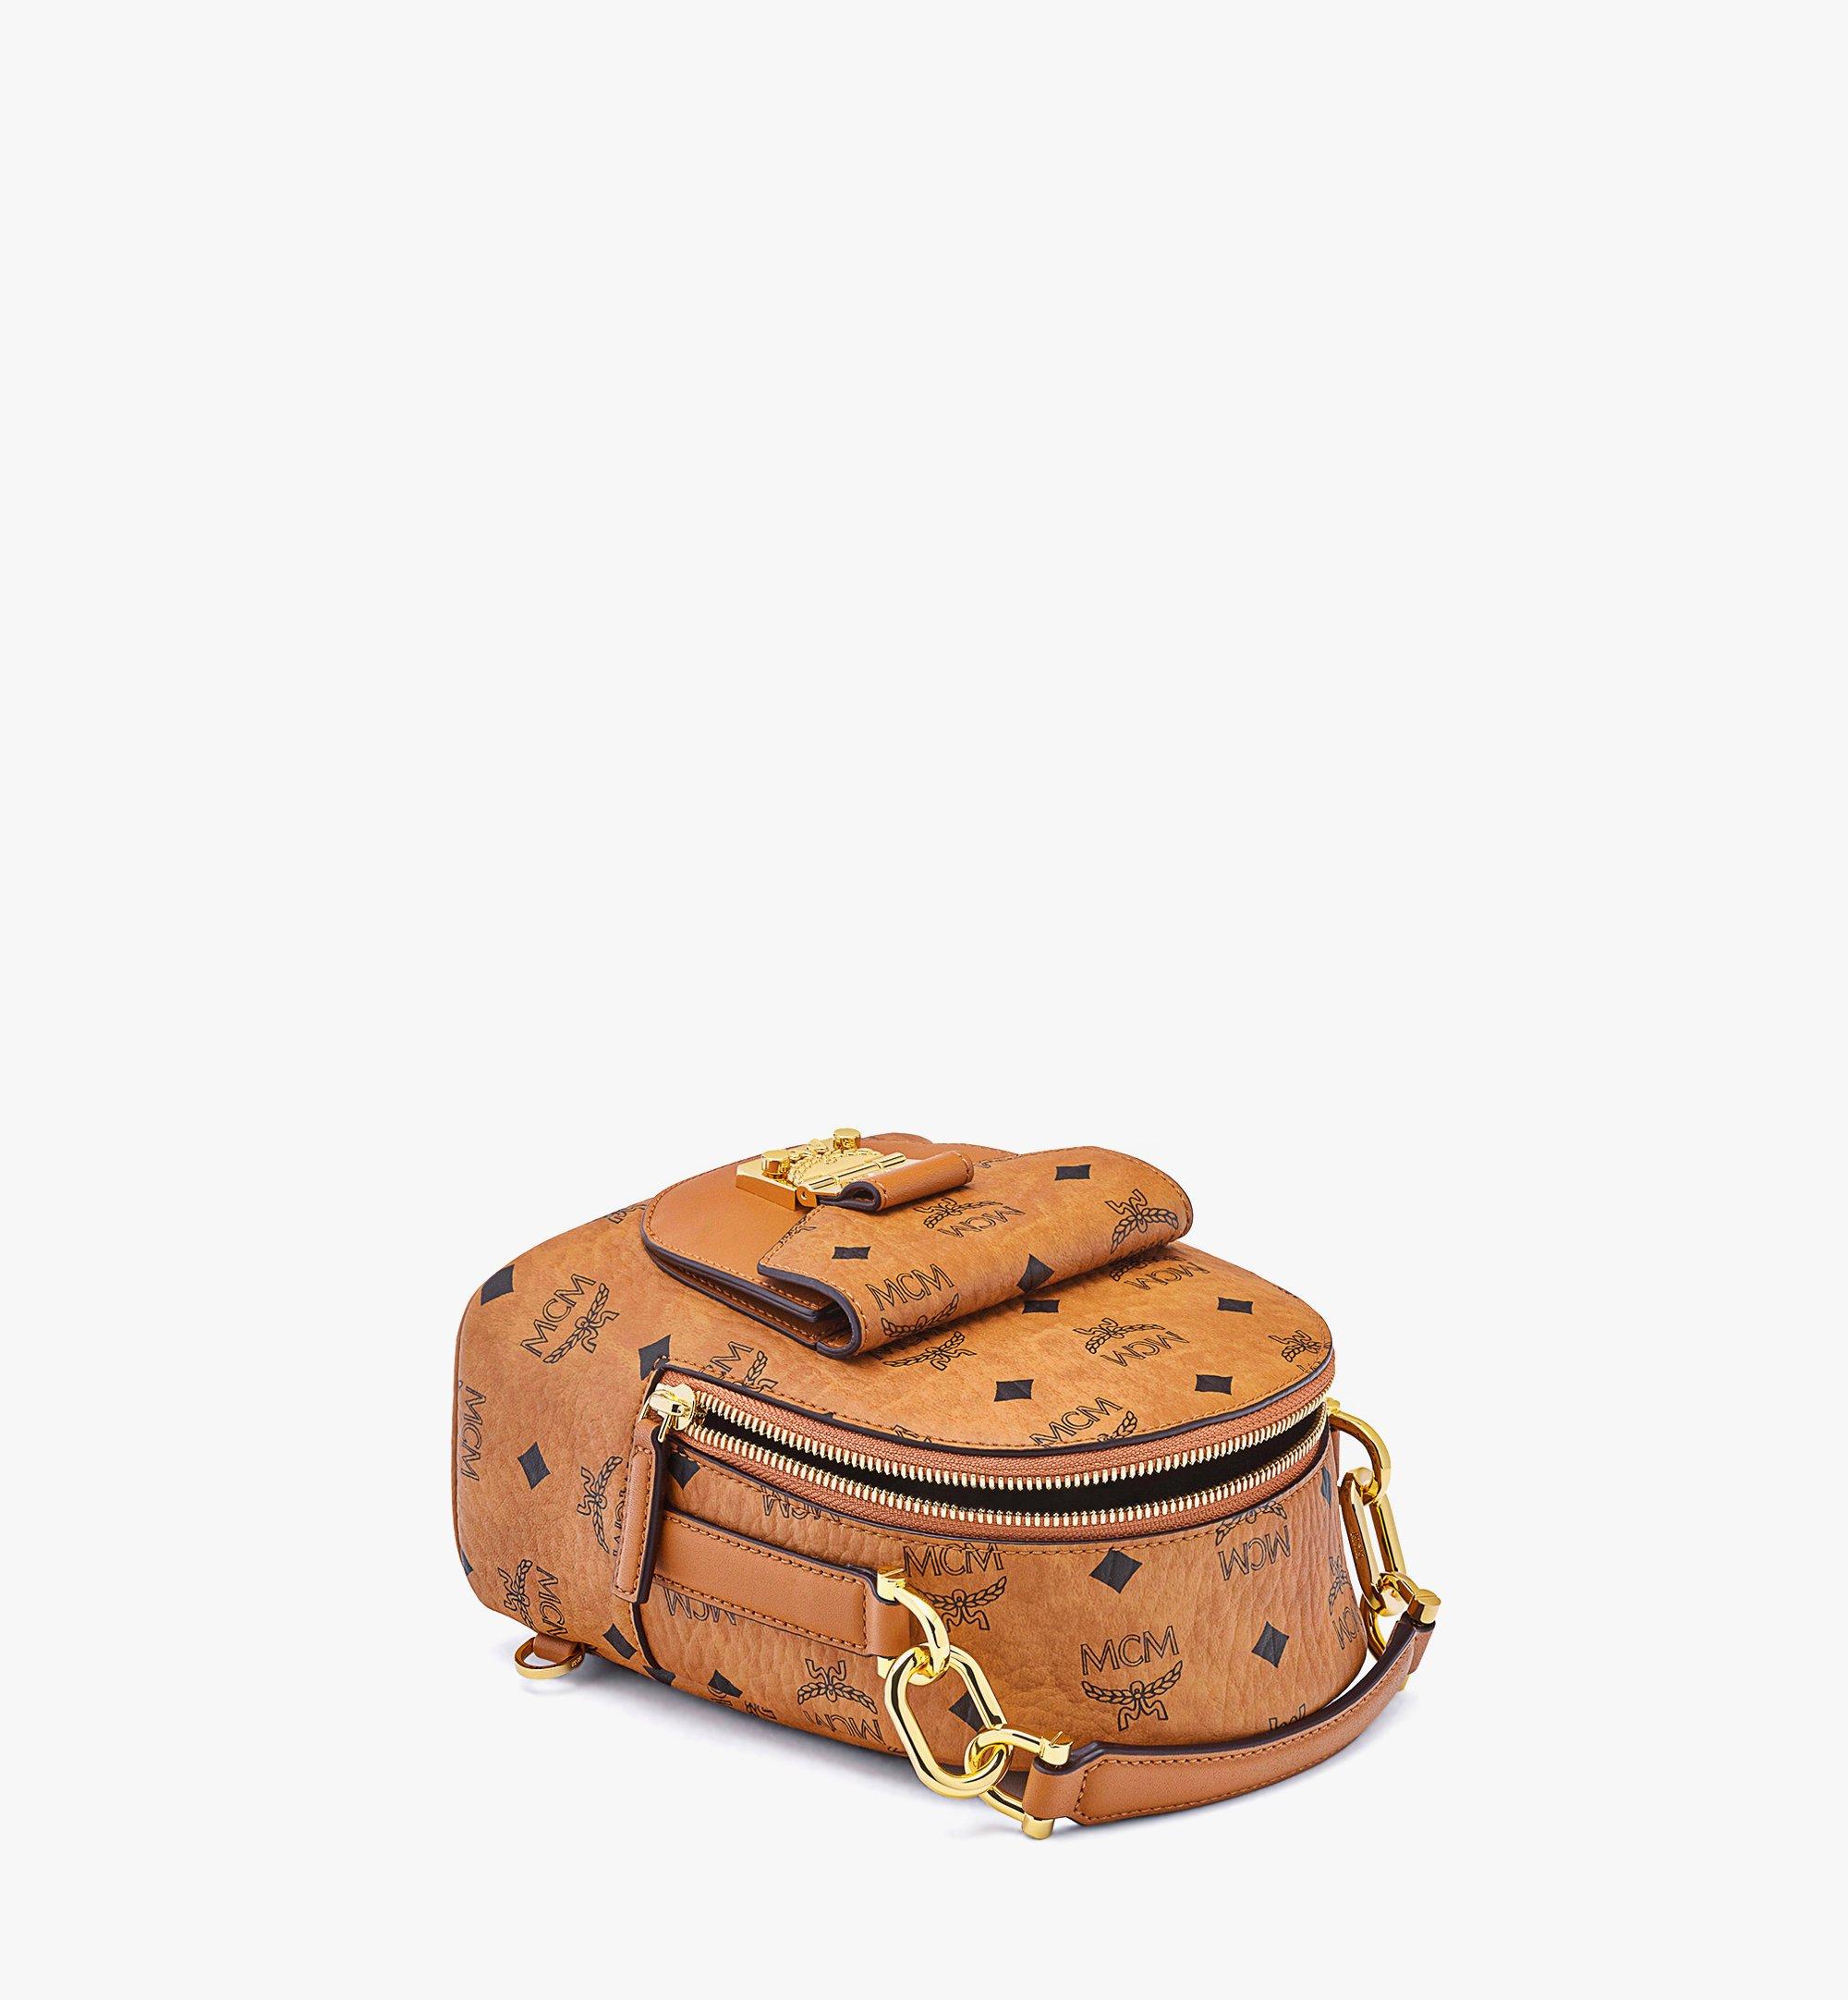 MCM Tracy Backpack in Visetos Cognac MWKBSPA01CO001 Alternate View 2